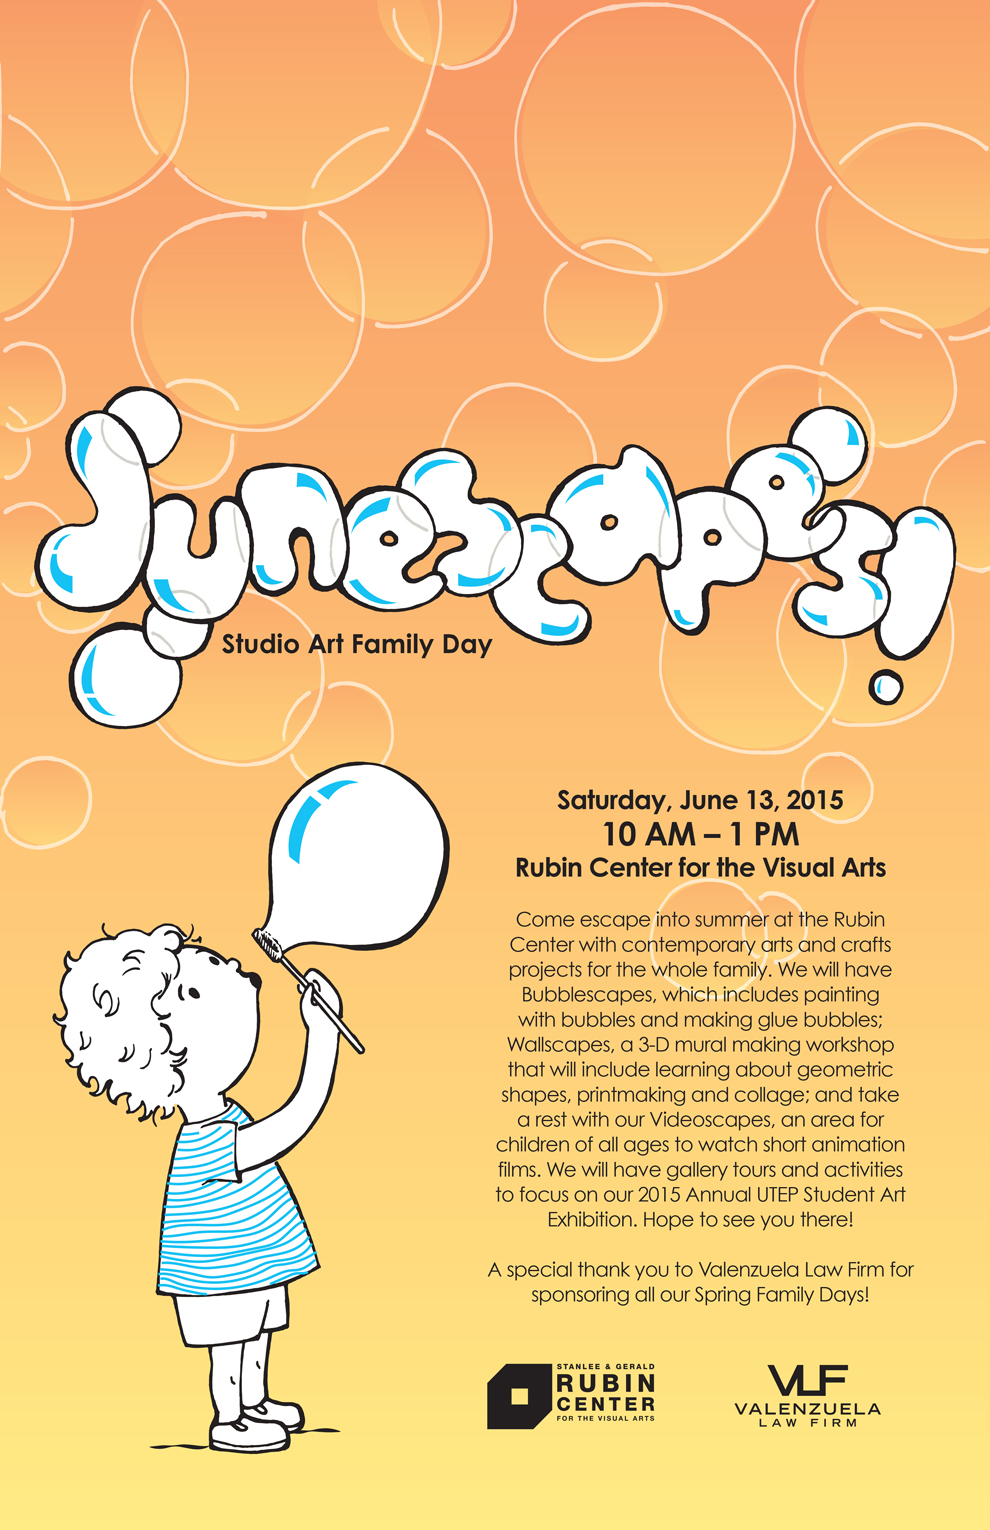 Junescape Family Day